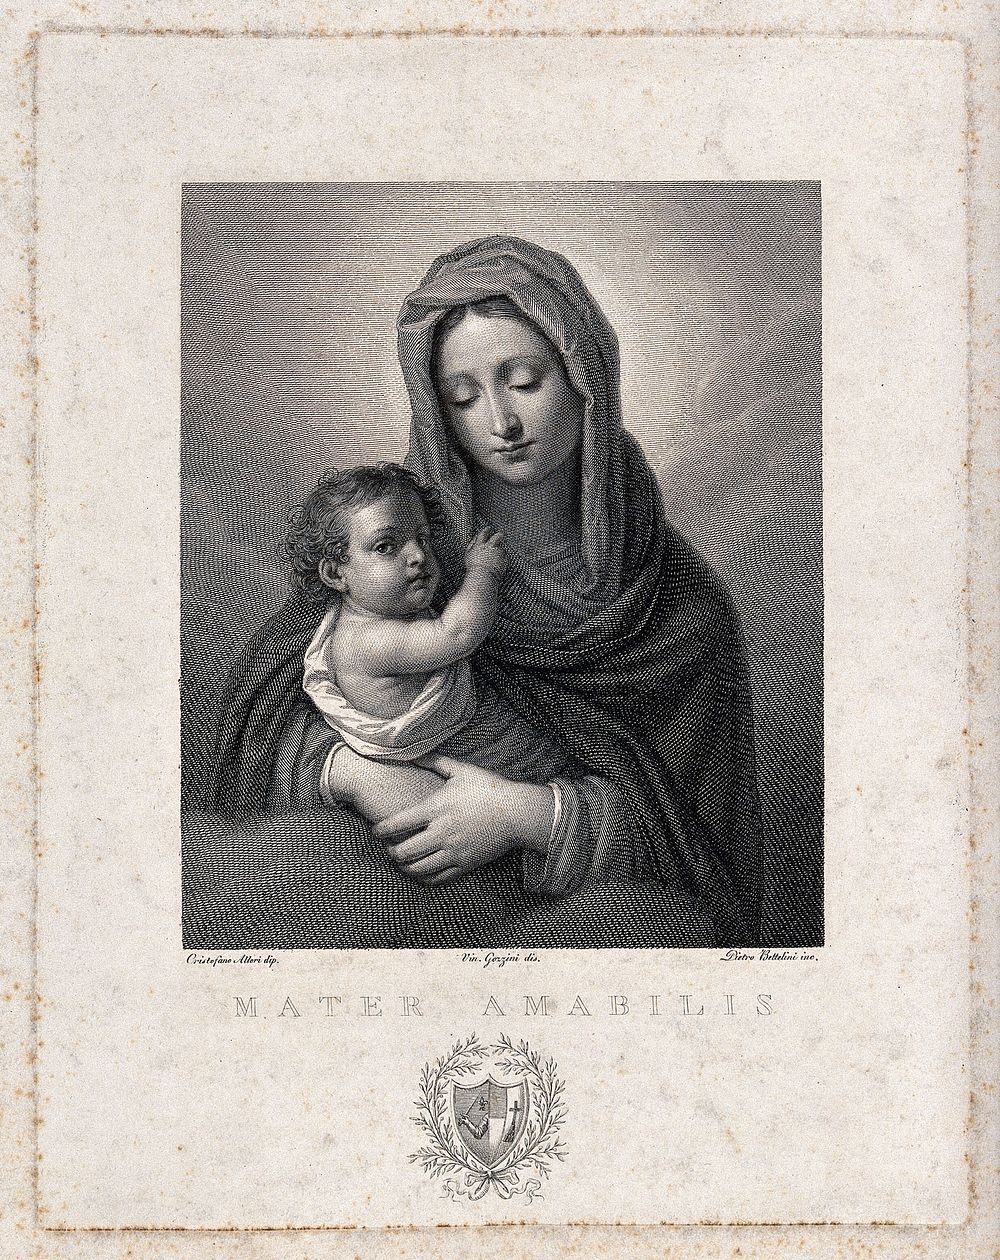 Saint Mary (the Blessed Virgin) with the Christ Child. Line engraving by P. Bettelini after V. Gozzini after C. Allori.